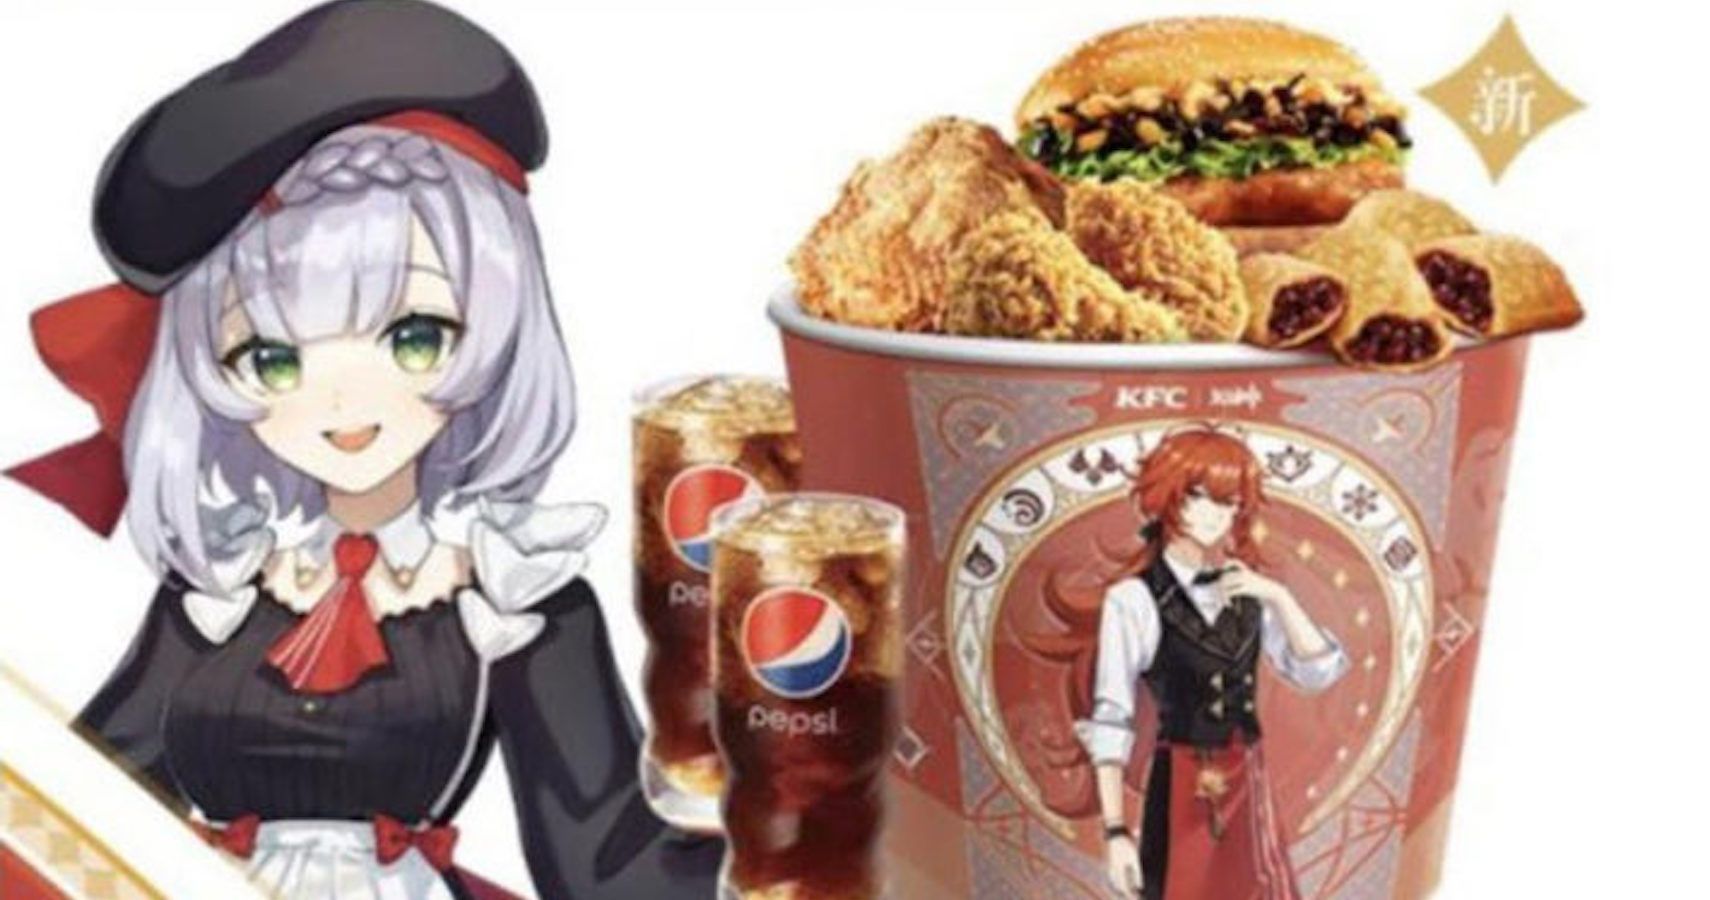 Genshin Impact Is Partnering With Kfc For A Crossover Event In China